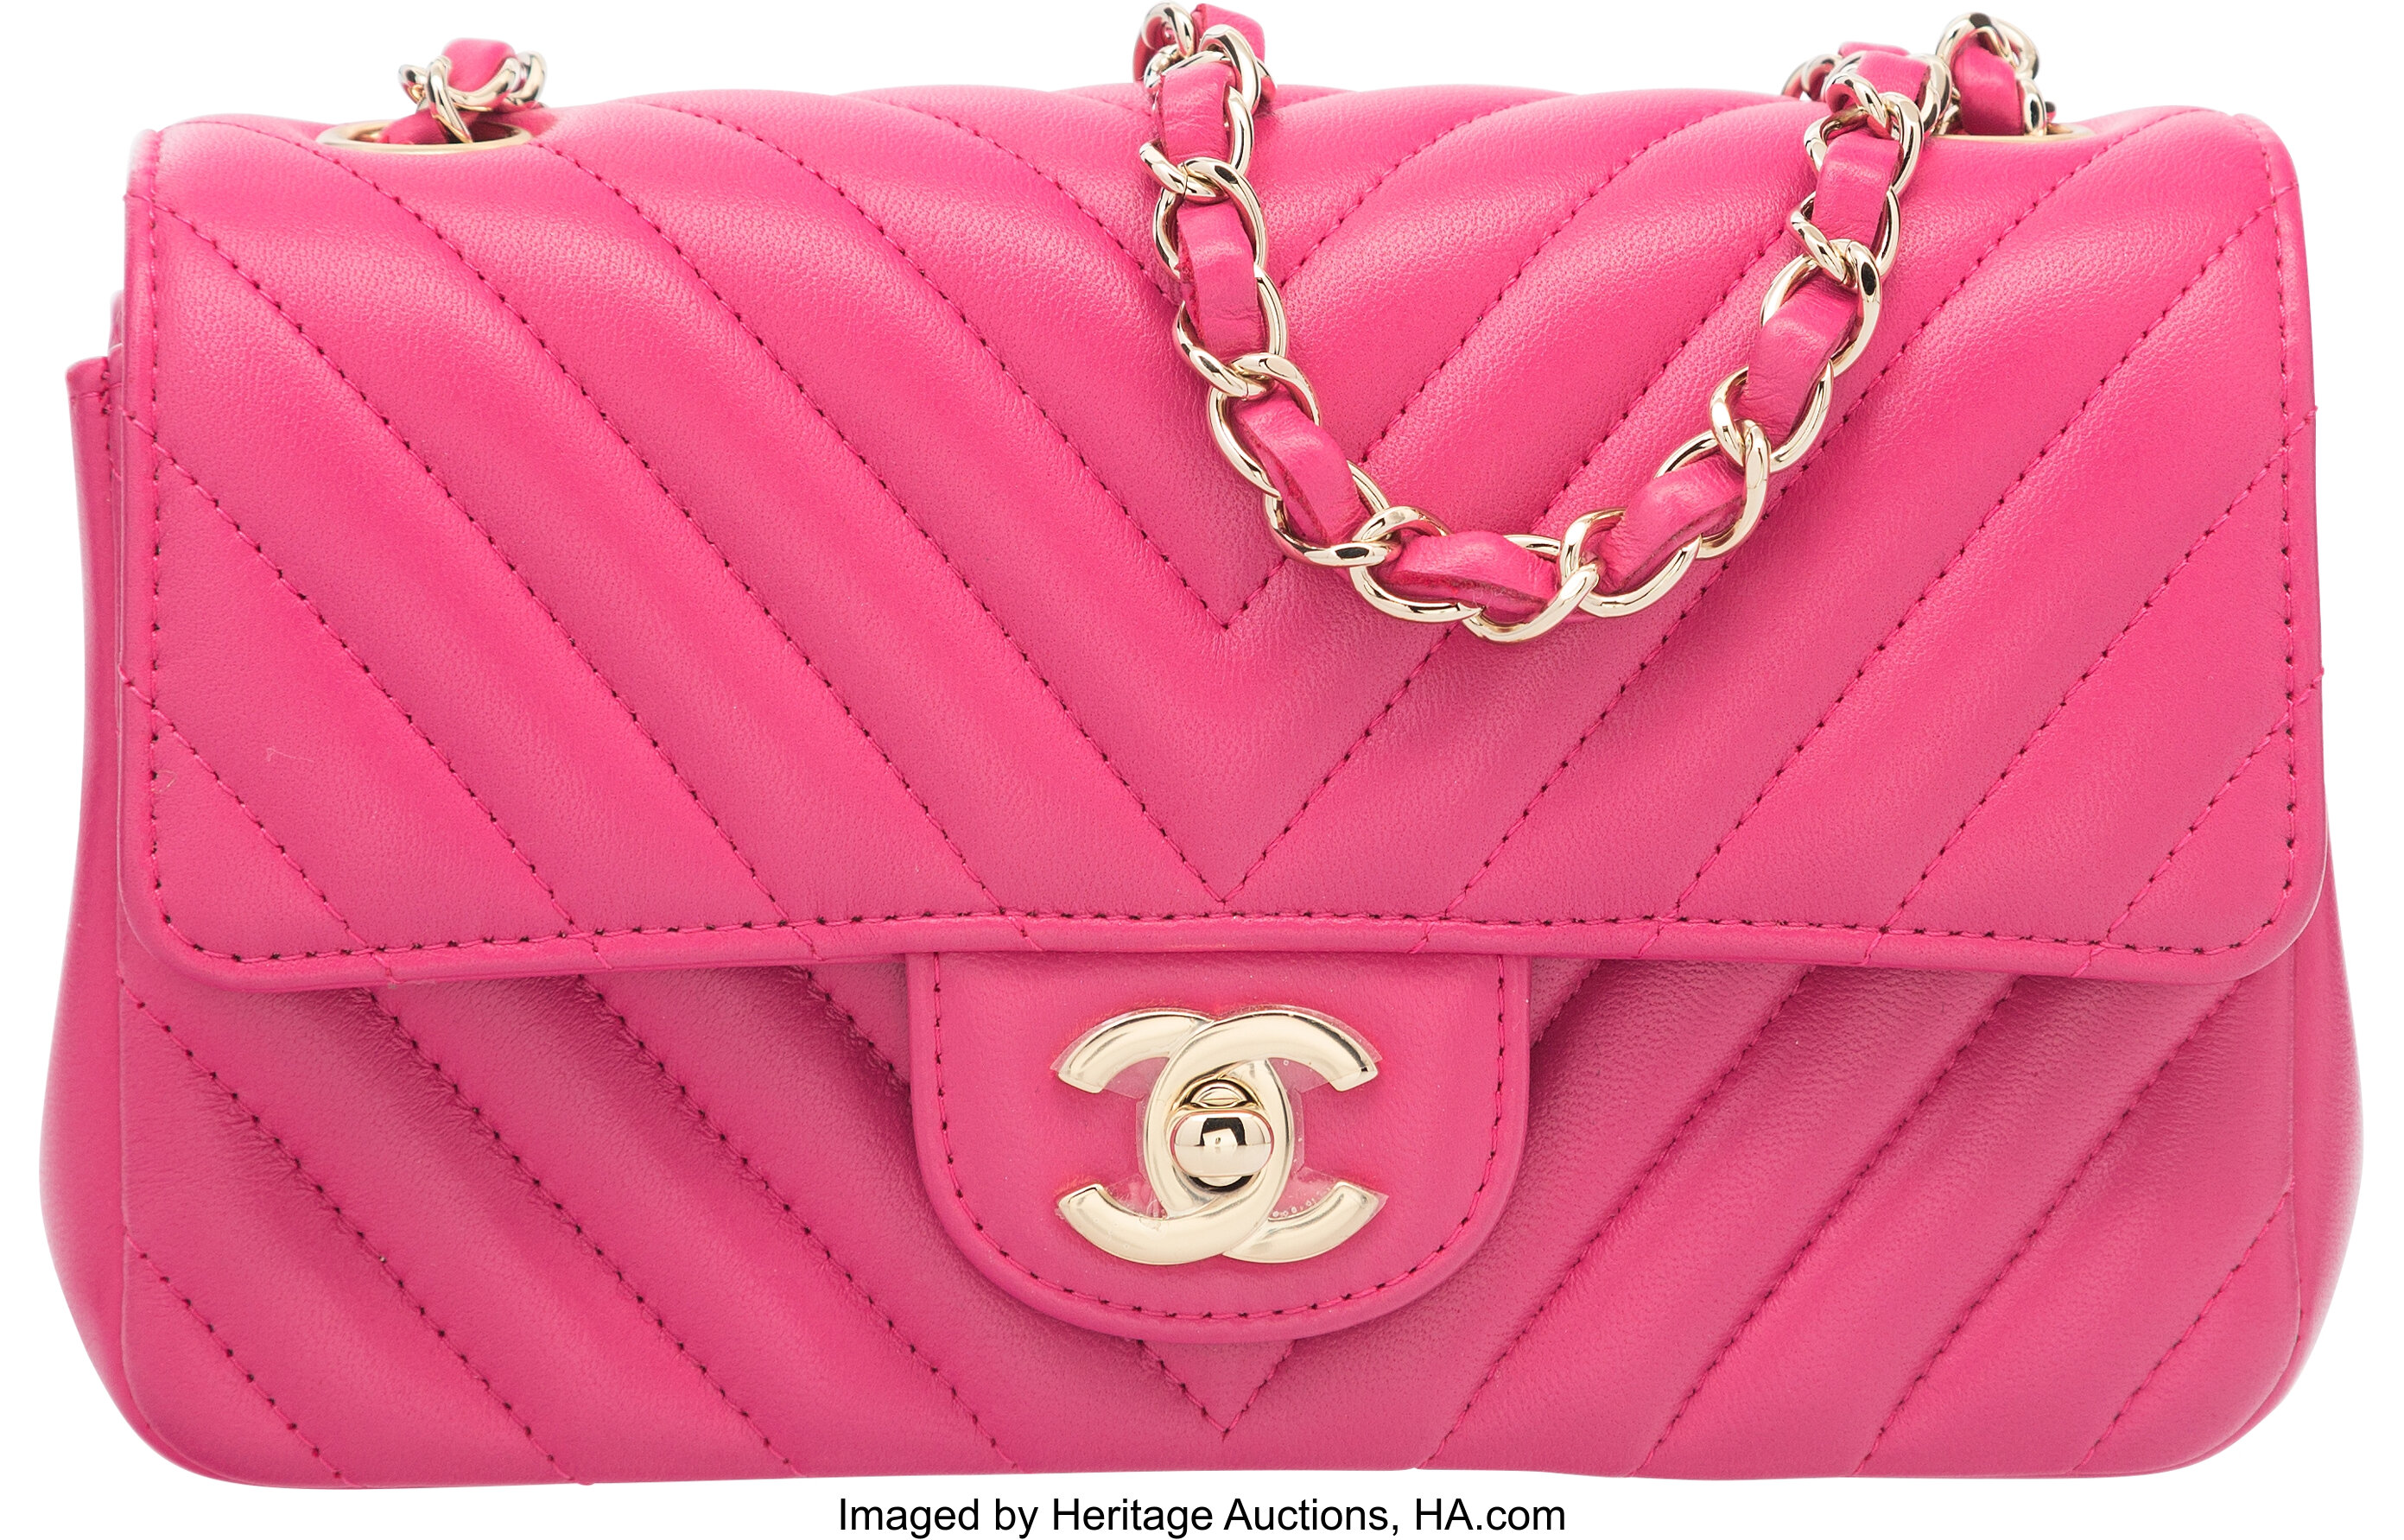 Chanel Pink Chevron Quilted Lambskin Leather Mini Flap Bag.